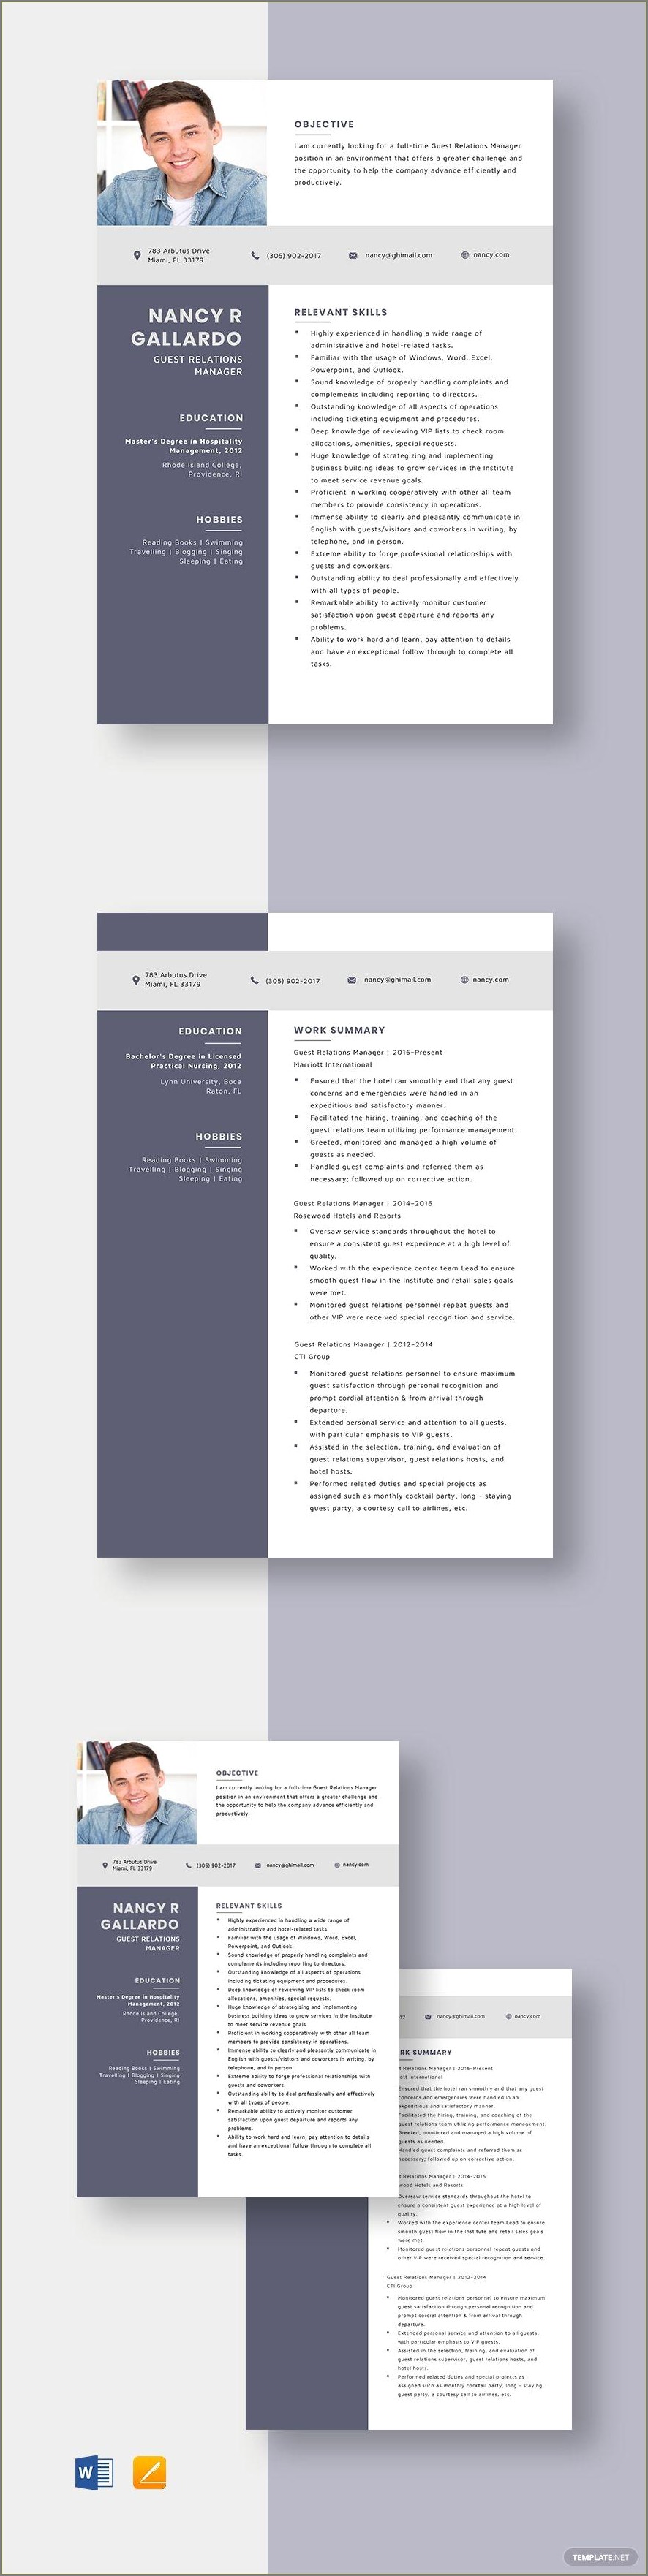 Hotel Guest Relations Manager Resume Sample - Resume Example Gallery